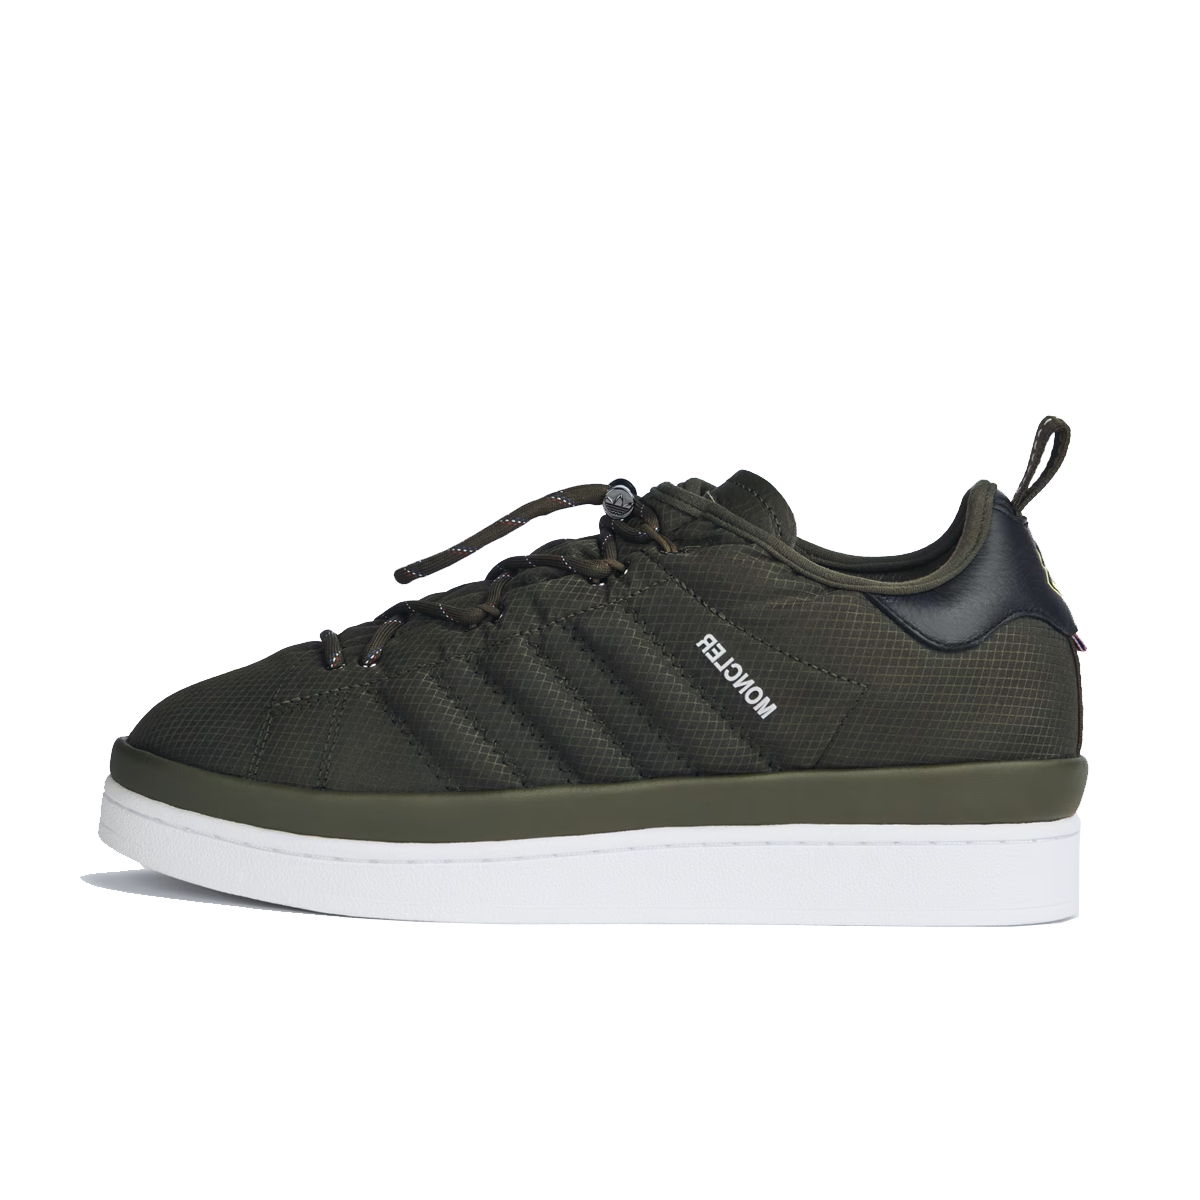 Moncler x adidas Campus 'Olive Night'